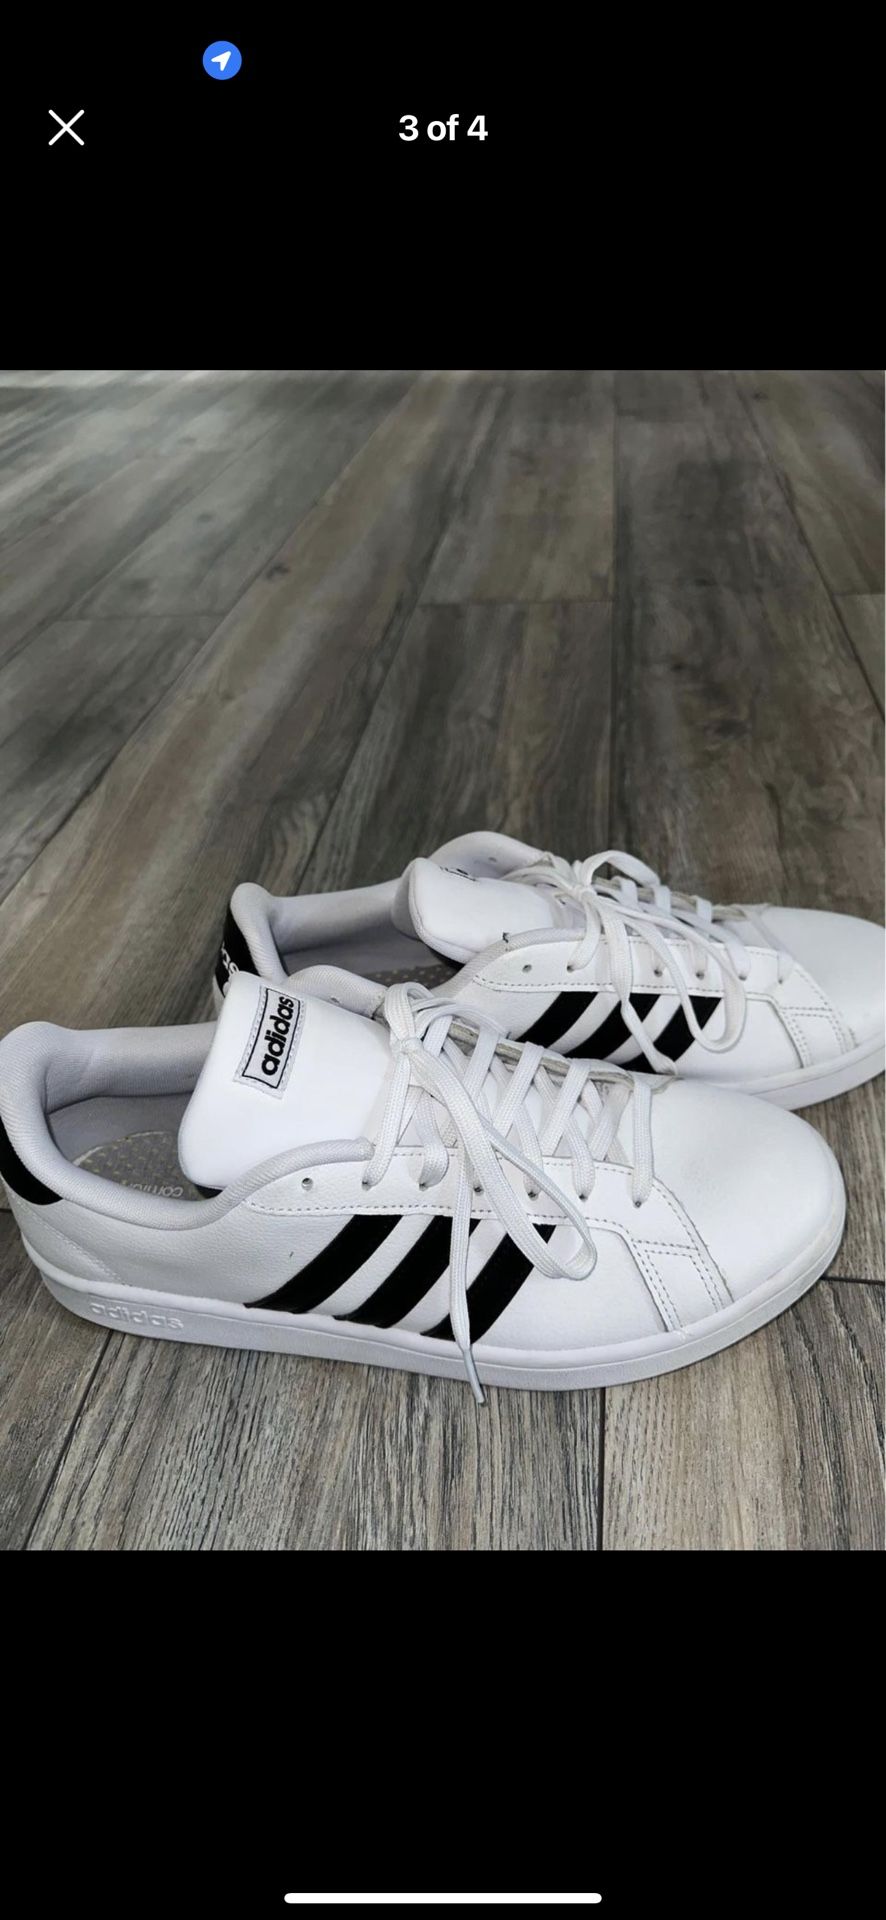 Adidas shoes for man